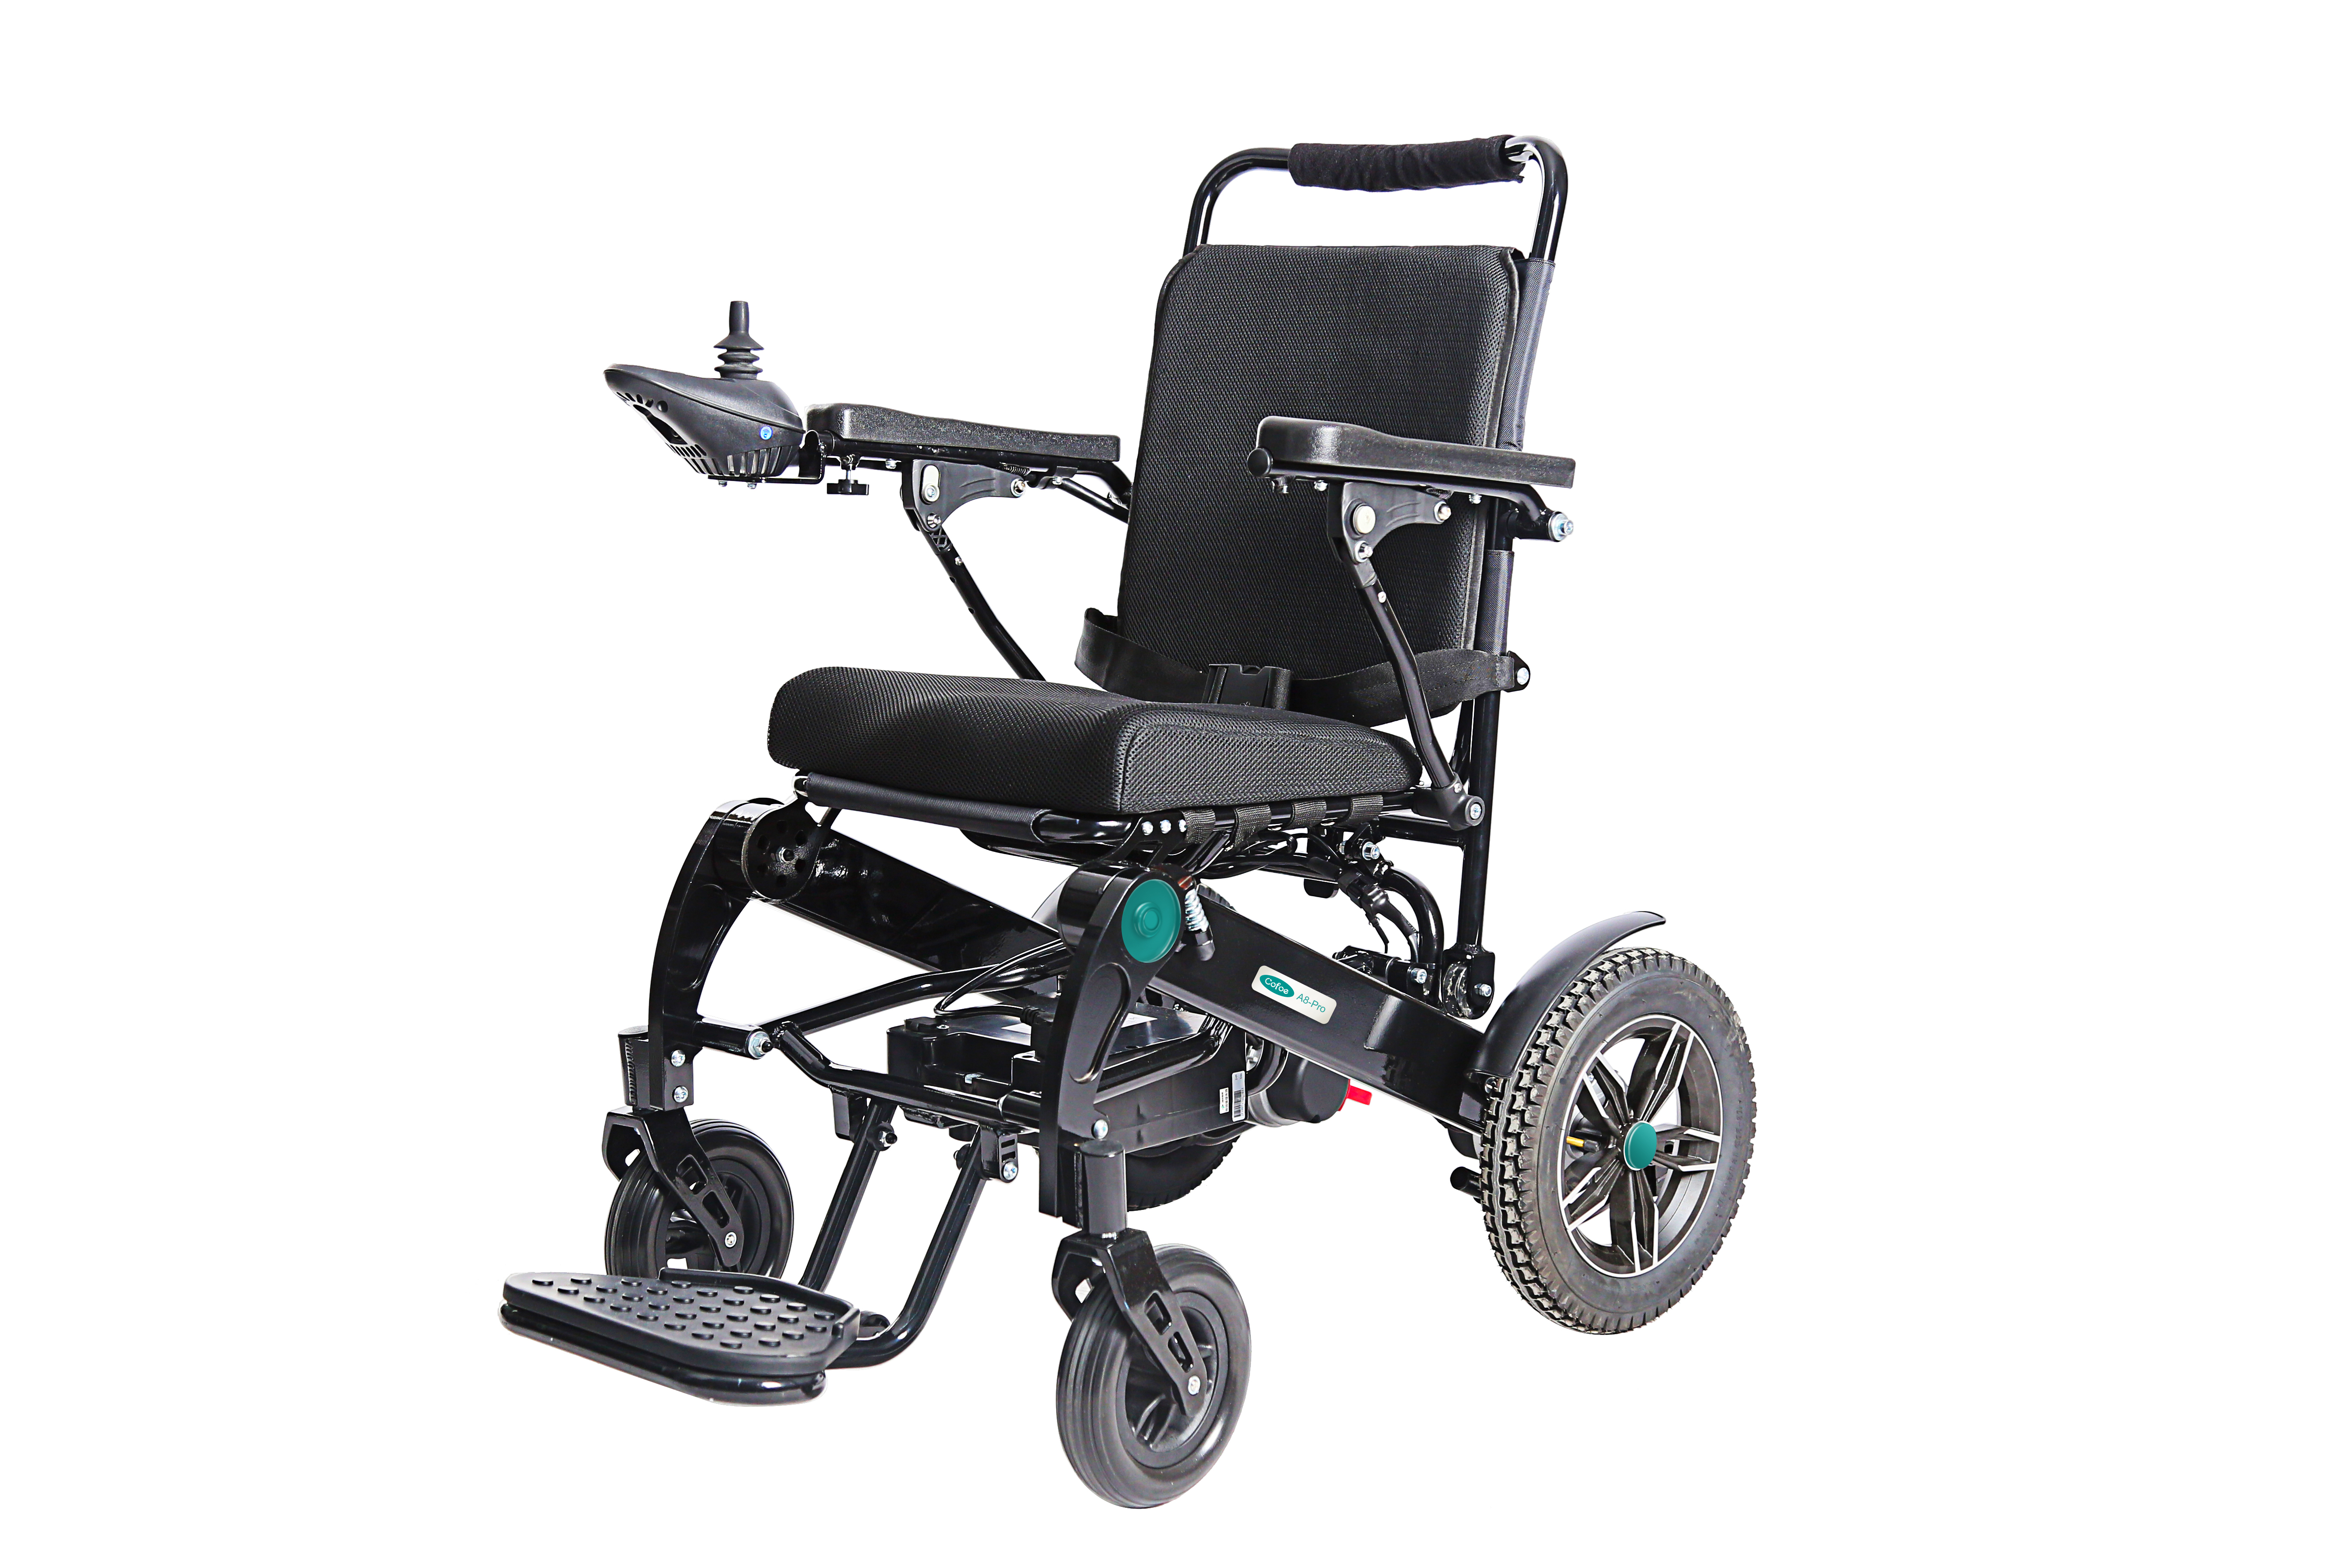 Advantages of electric wheelchair